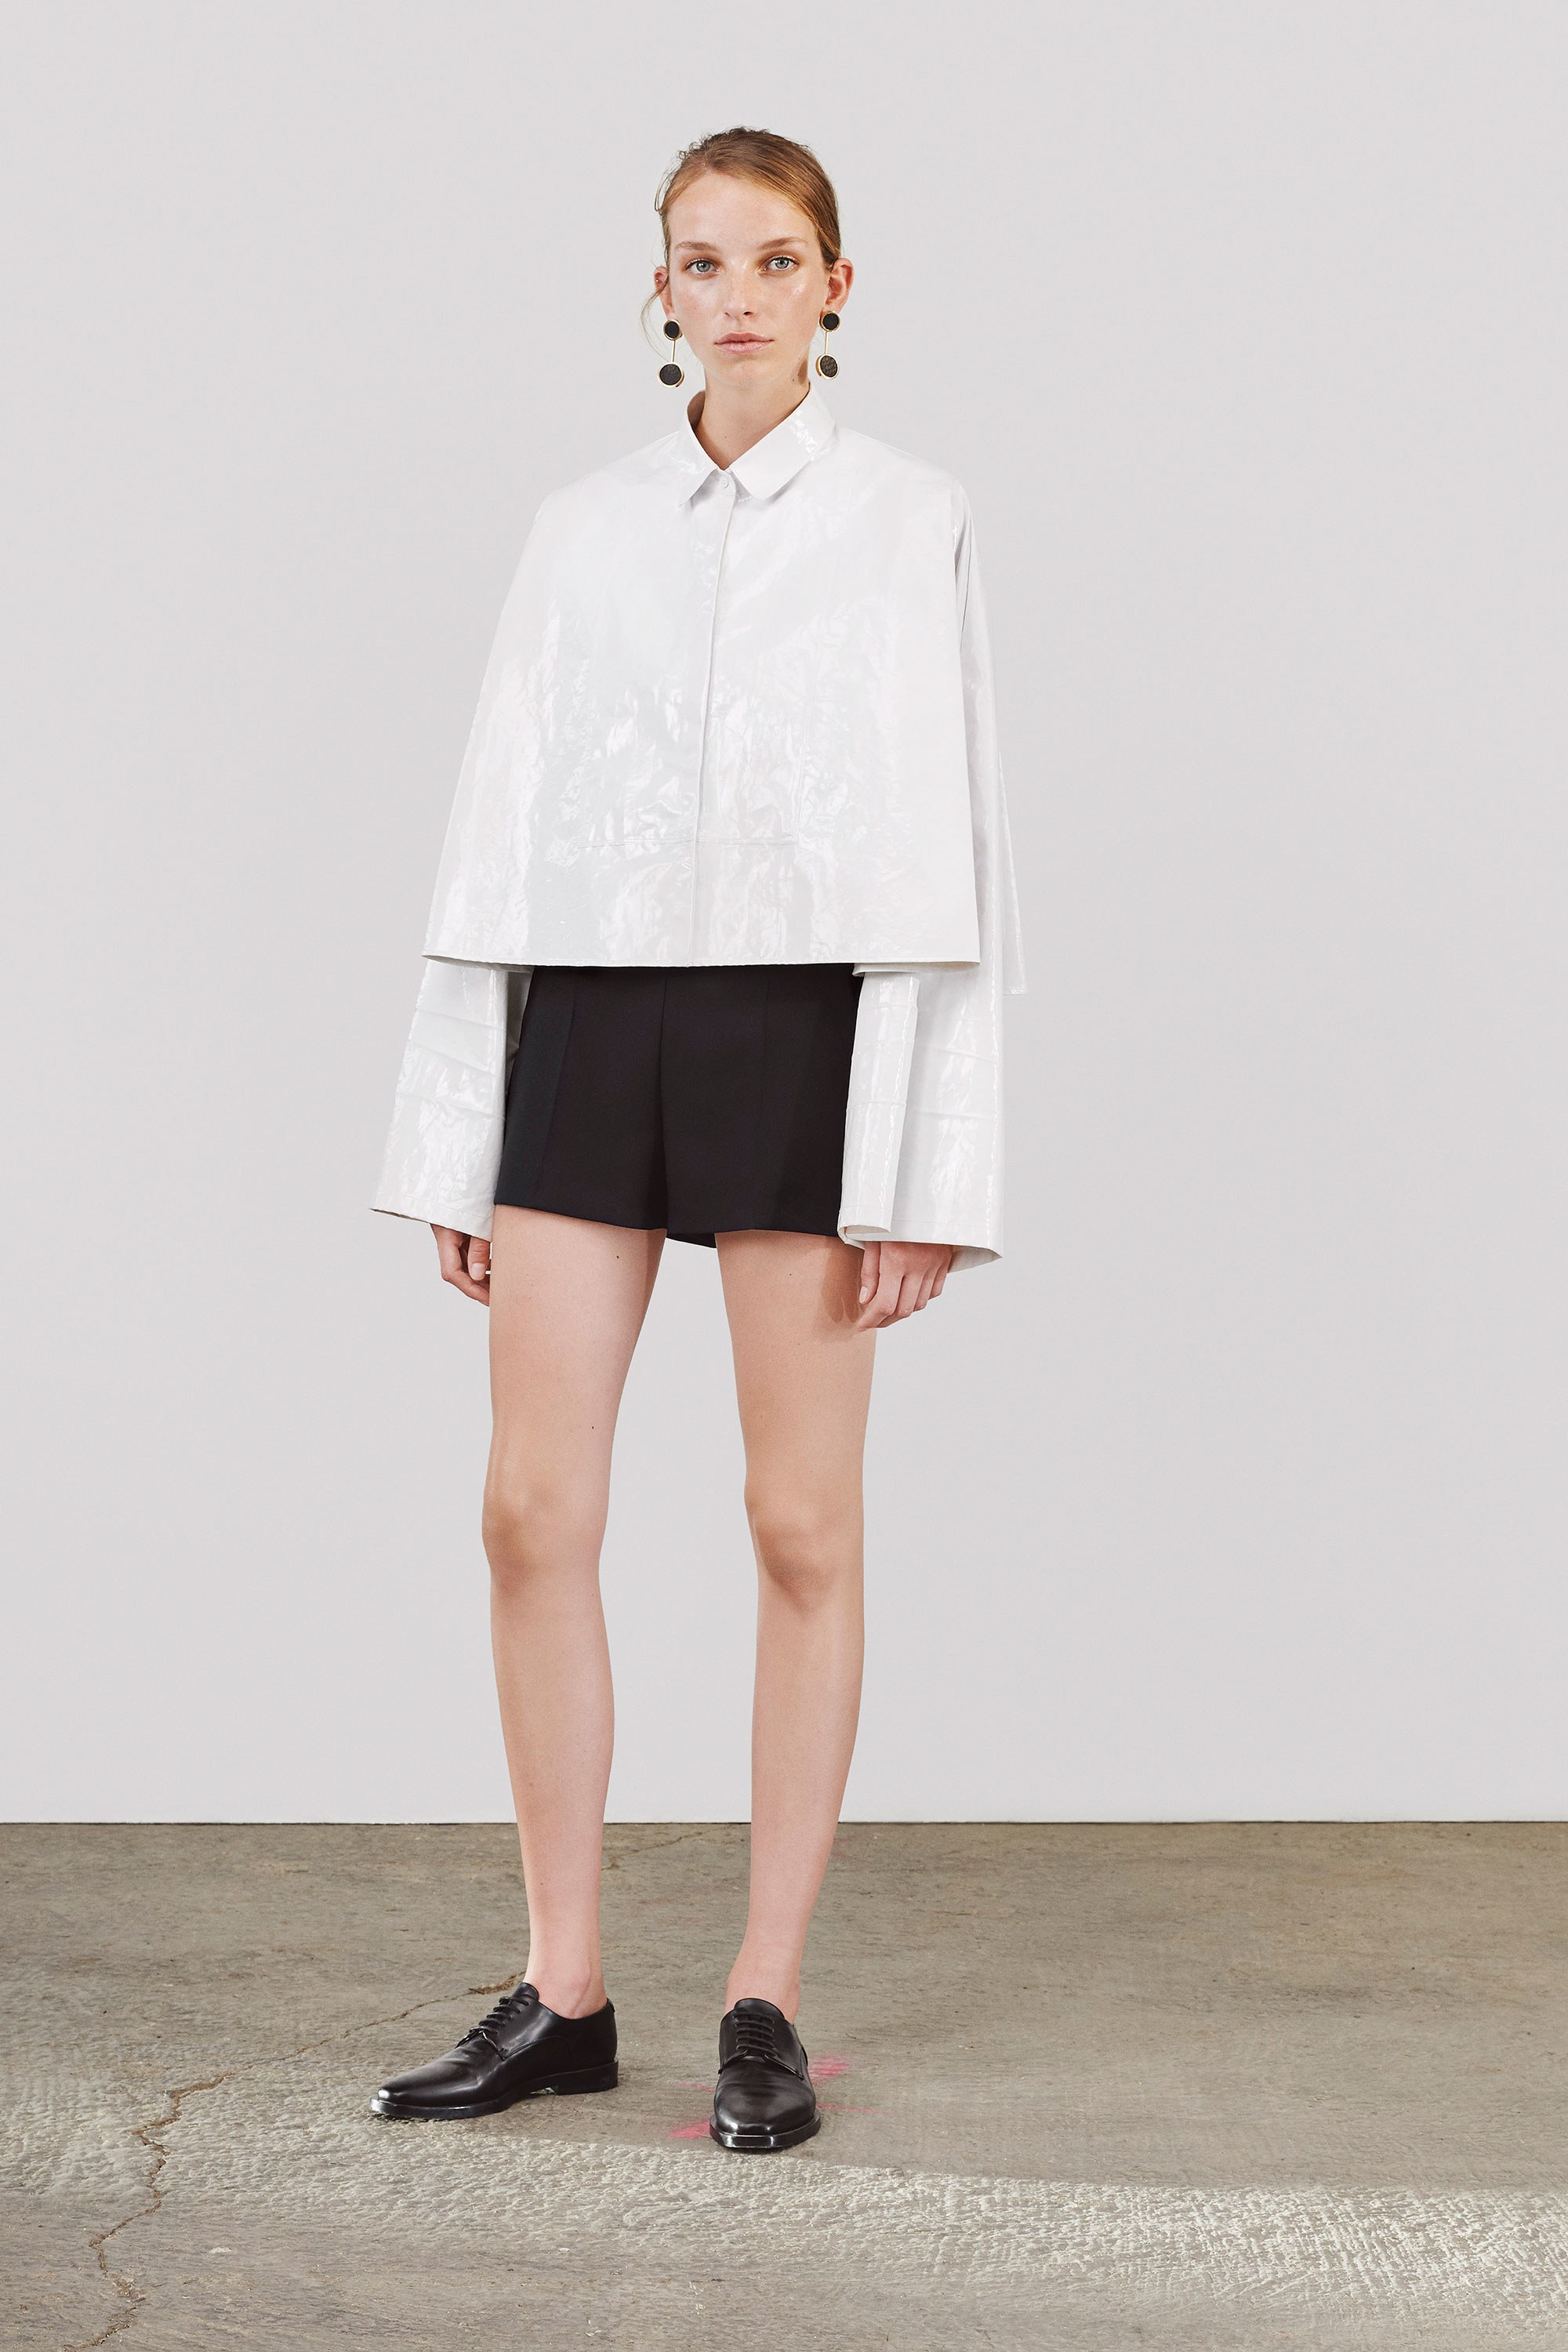 Jil Sander Collection white shirt black shorts summer outfit